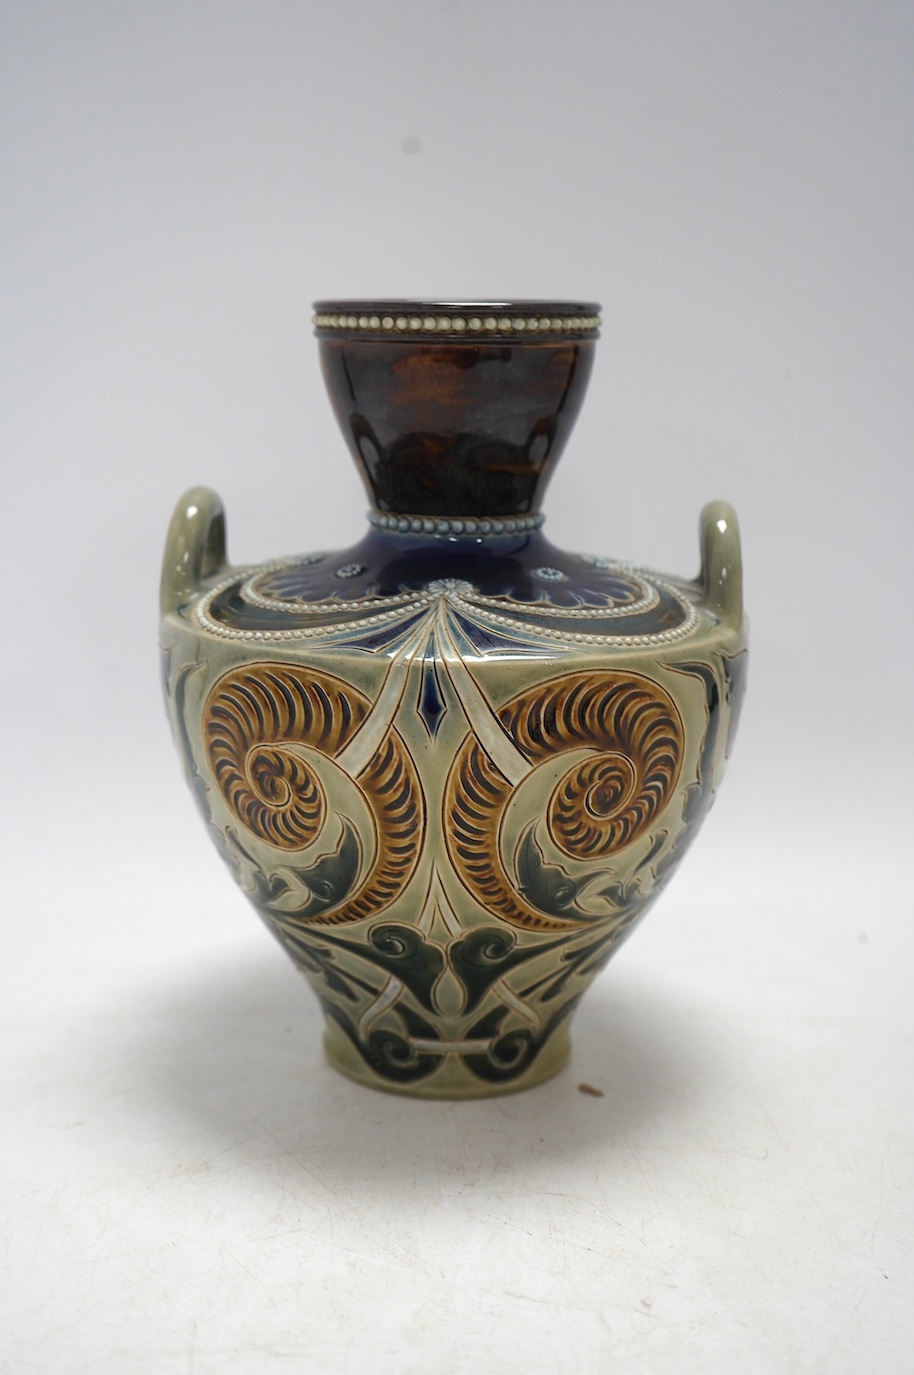 A Doulton Lambeth vase by Eliza Simmance, monogrammed and dated 1887, 20.5cm high. Condition - good